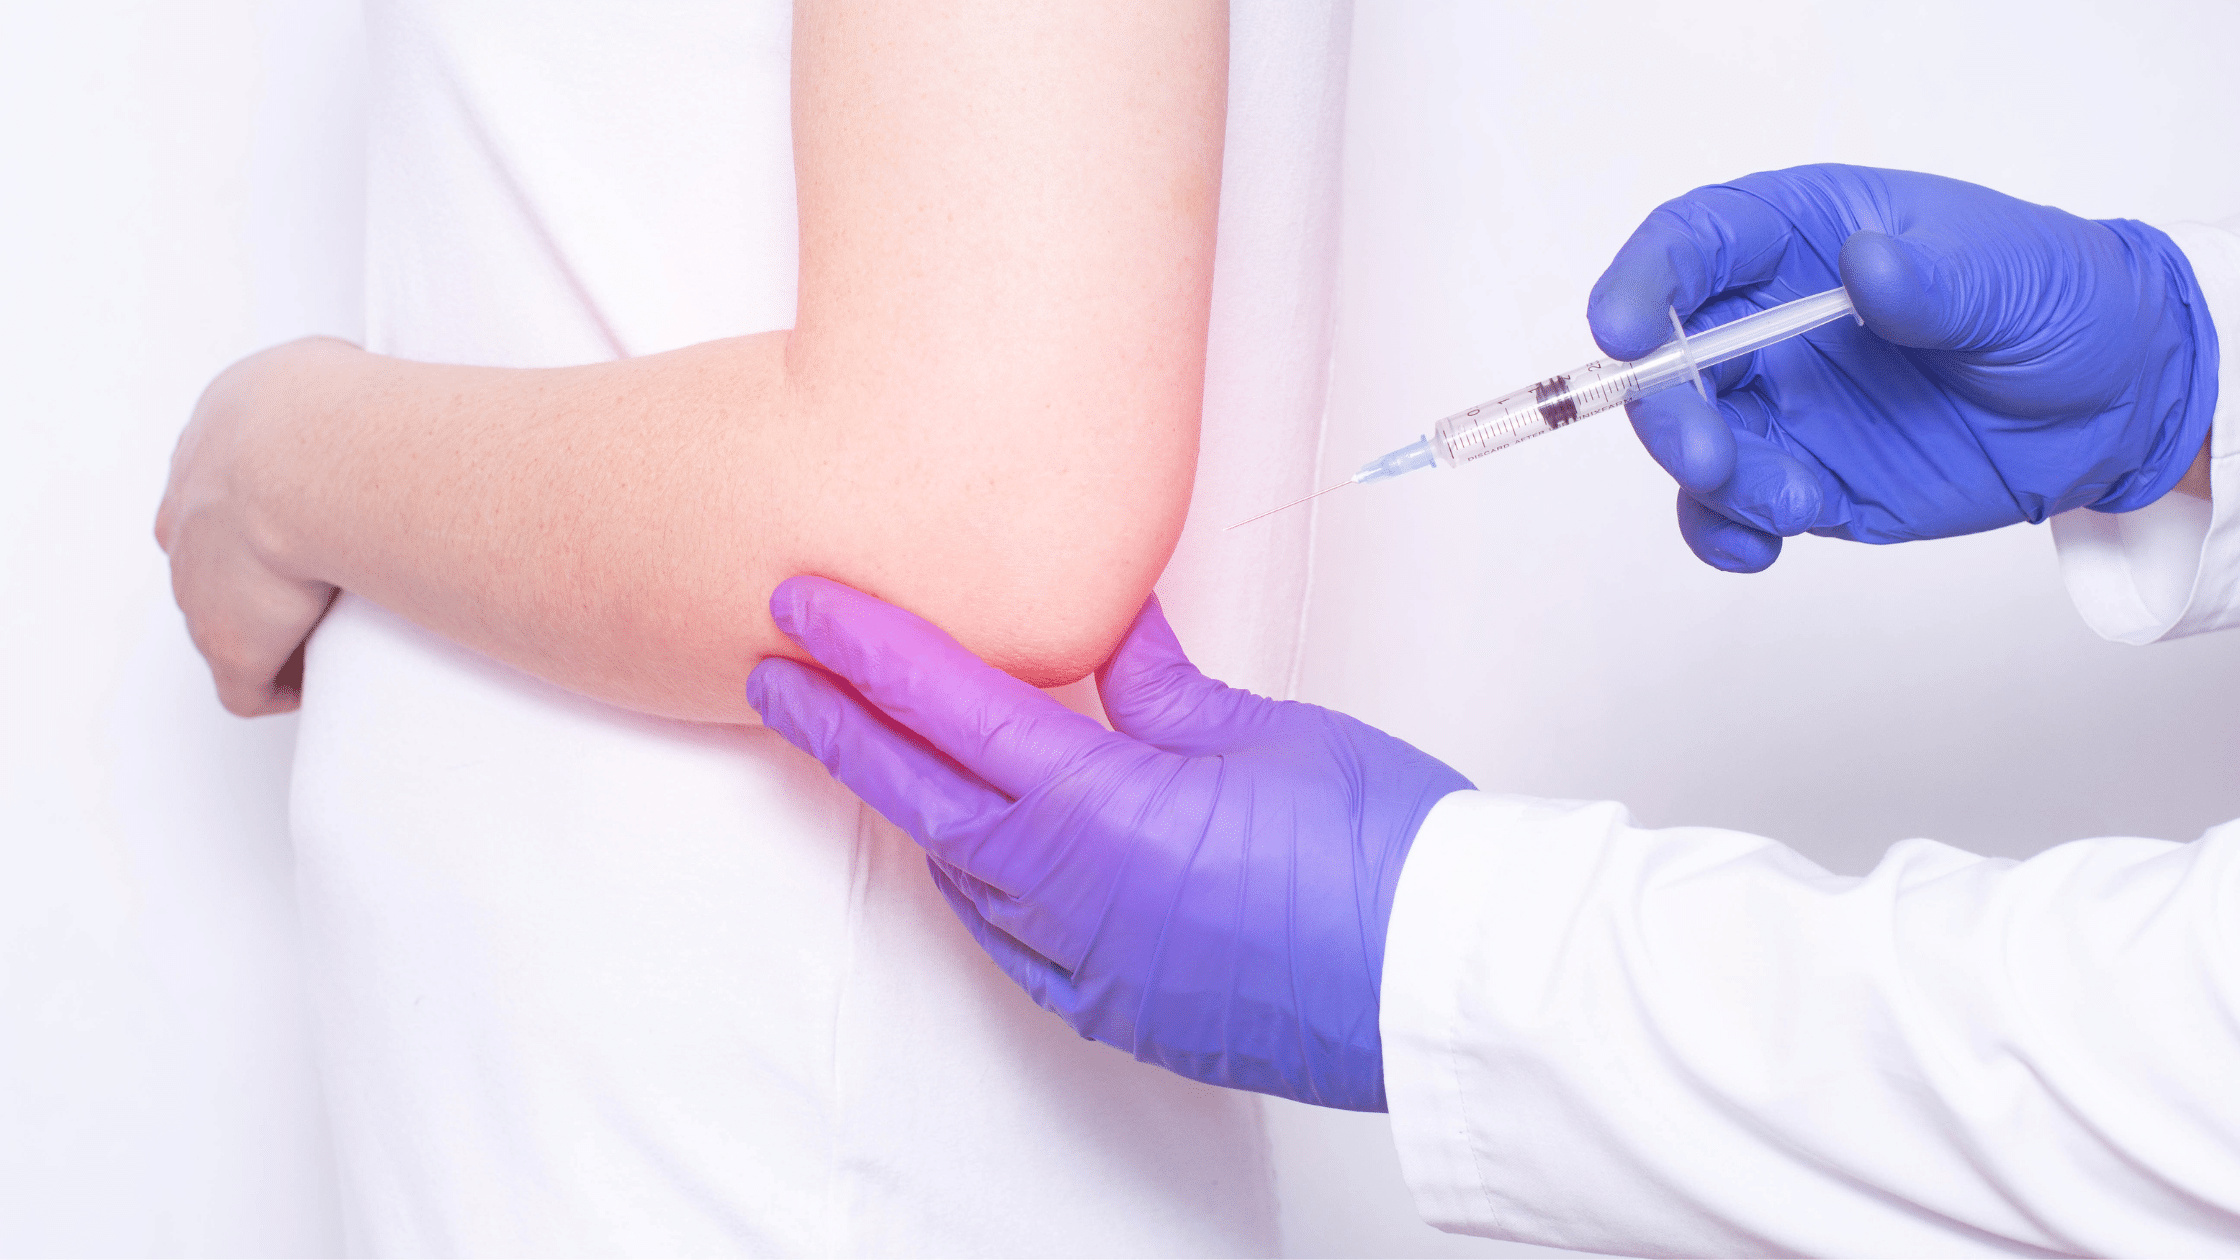 joint injection for joint pain relief in davenport iowa